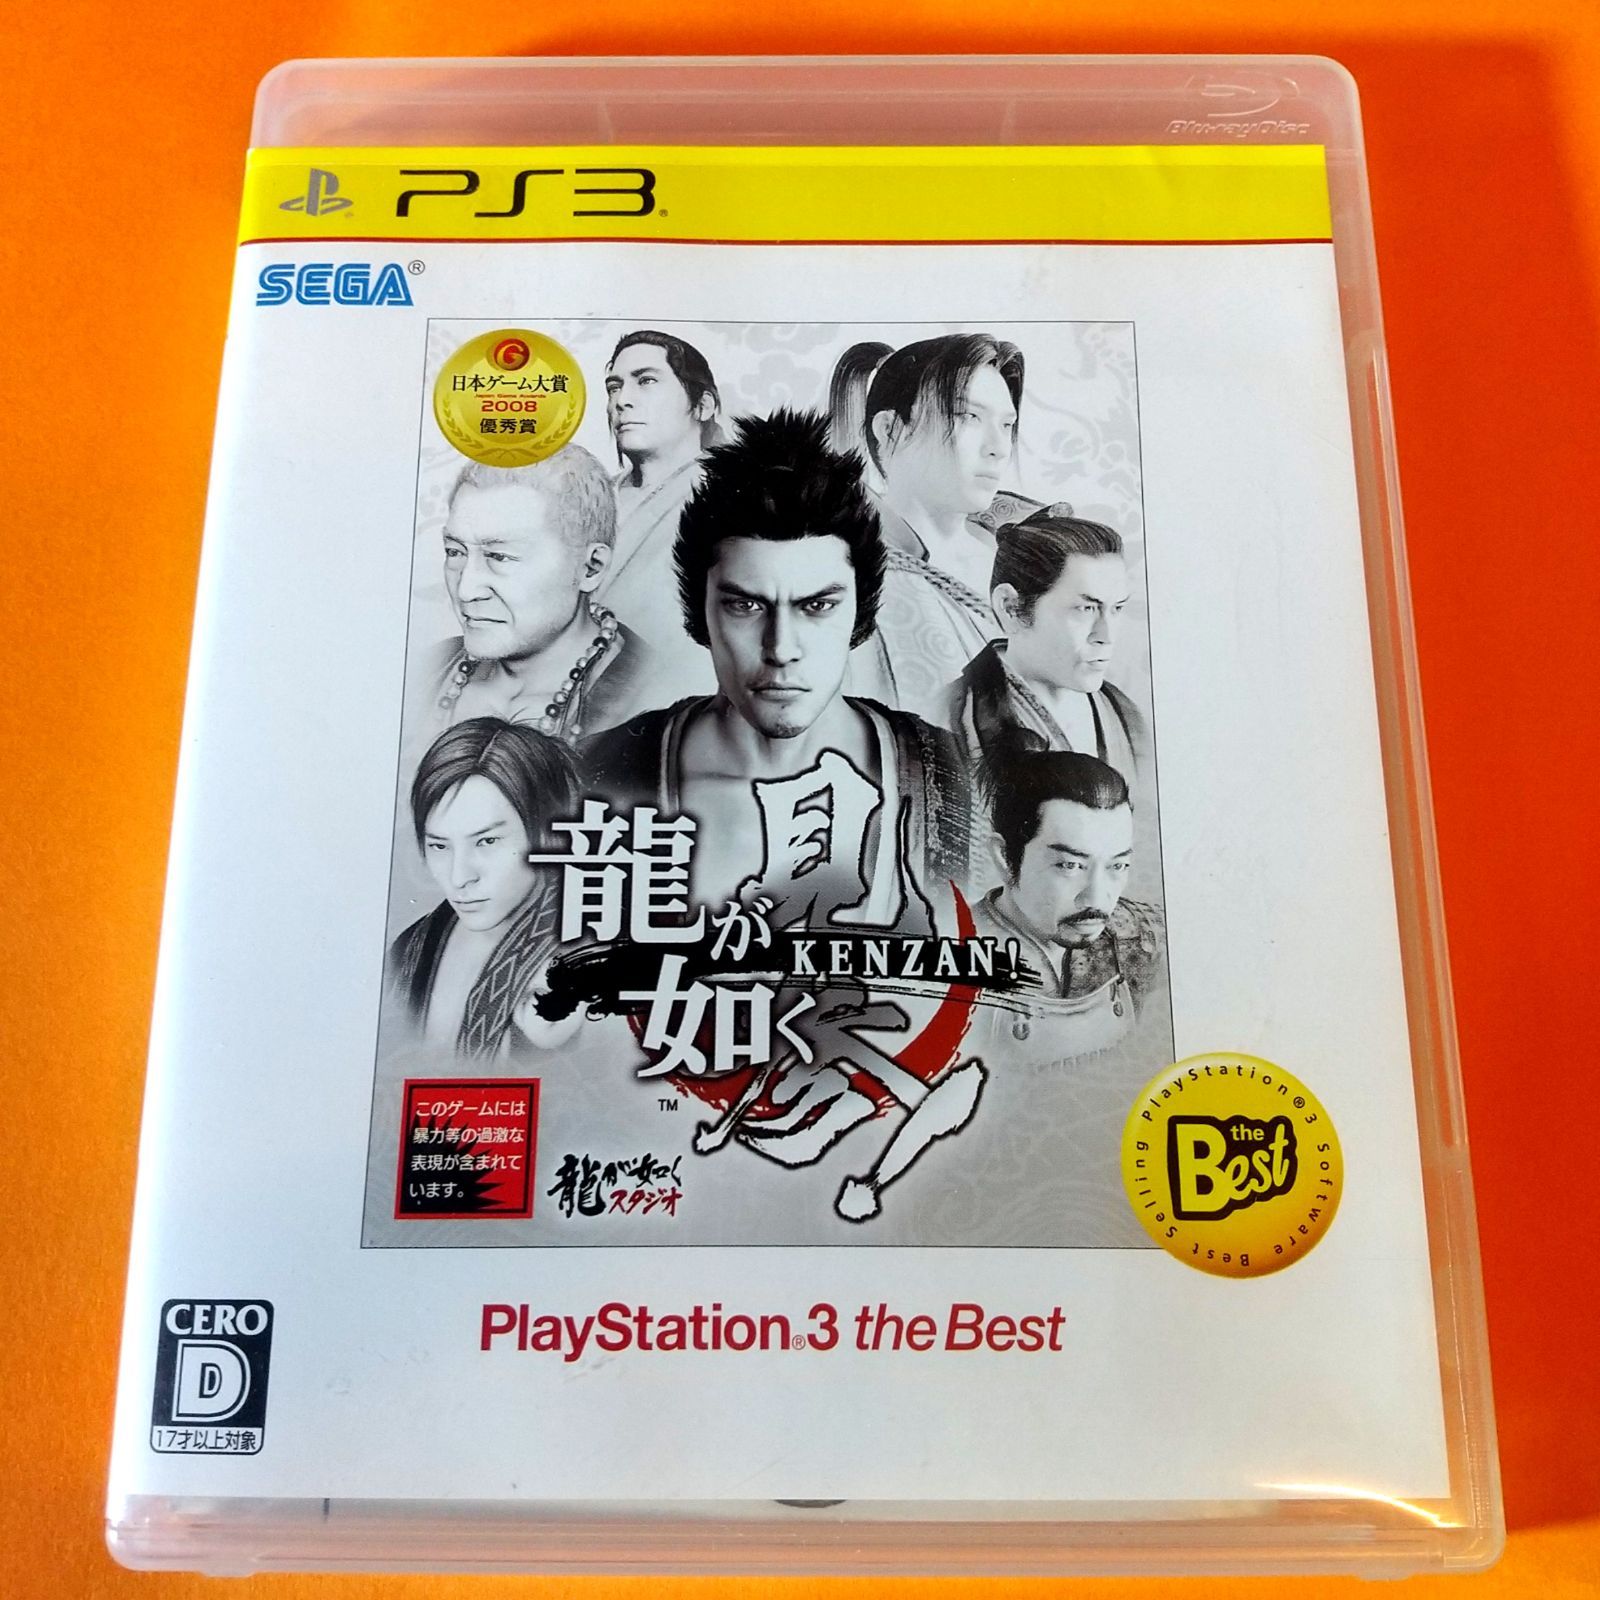 ⚔️龍が如く 見参! PlayStation3 the Best◻️⚔️ 龍が如く 維新 